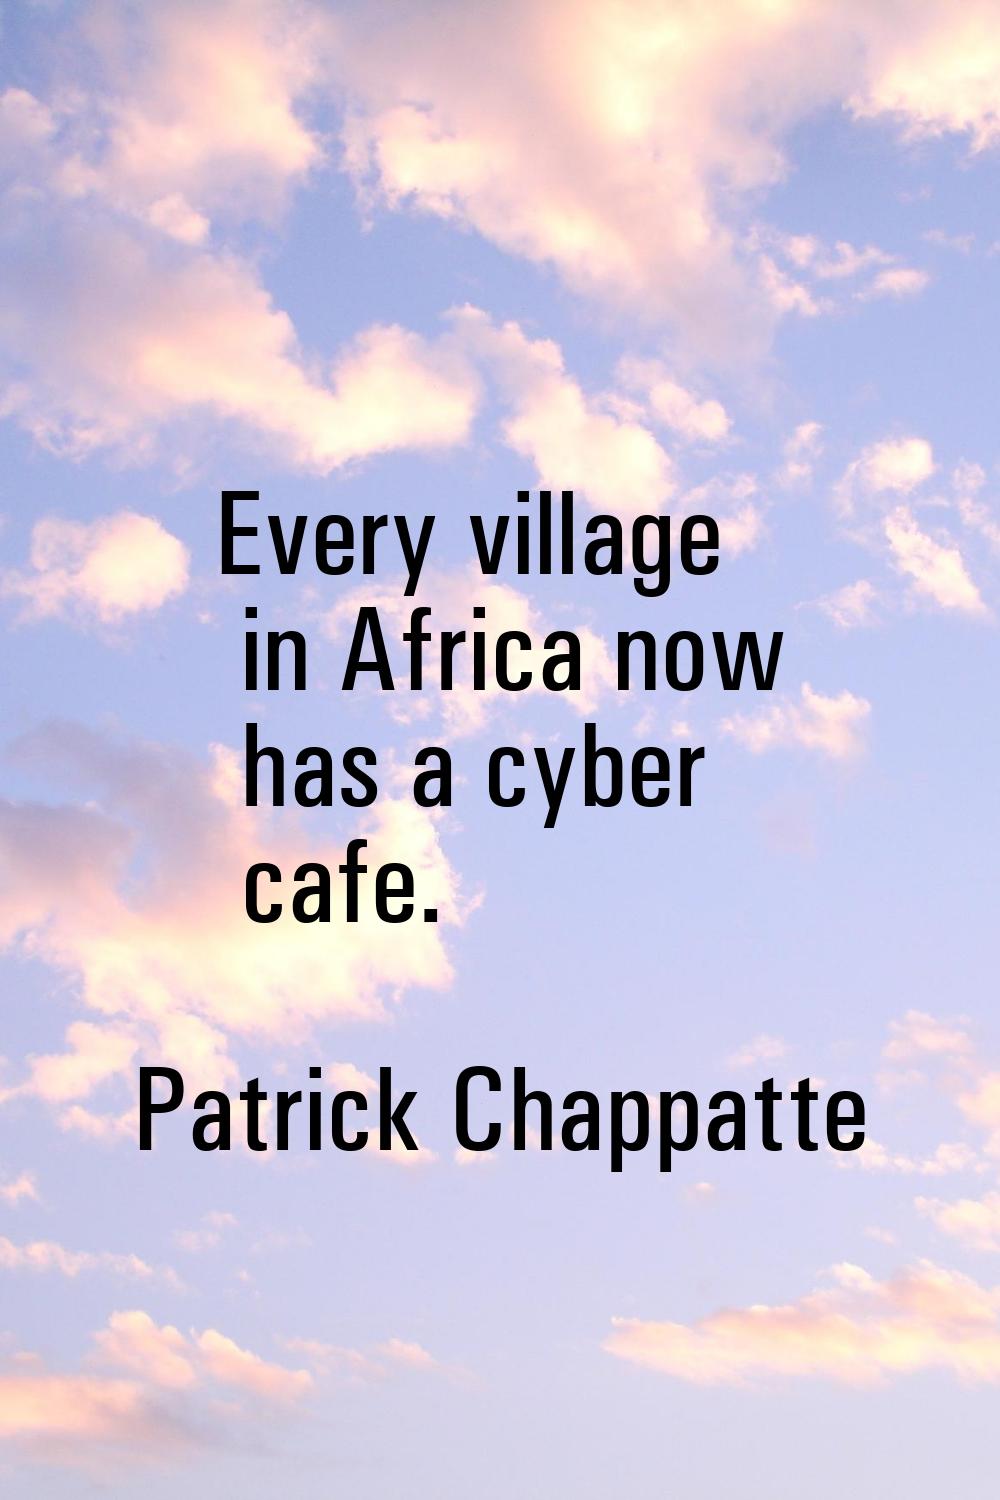 Every village in Africa now has a cyber cafe.